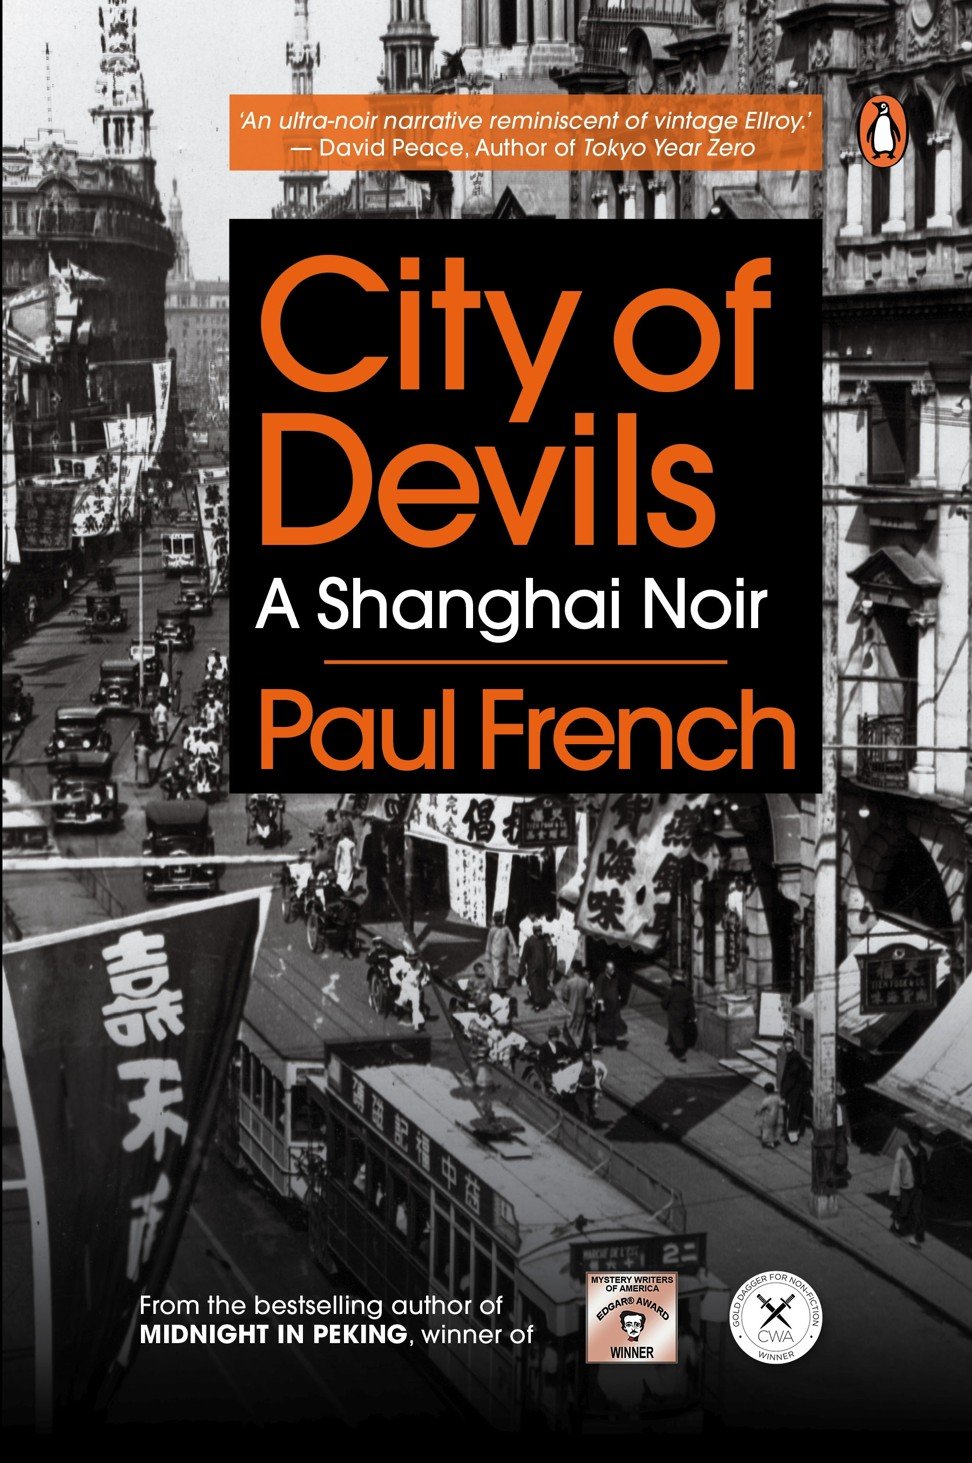 The cover of City of Devils – A Shanghai Noir by Paul French.